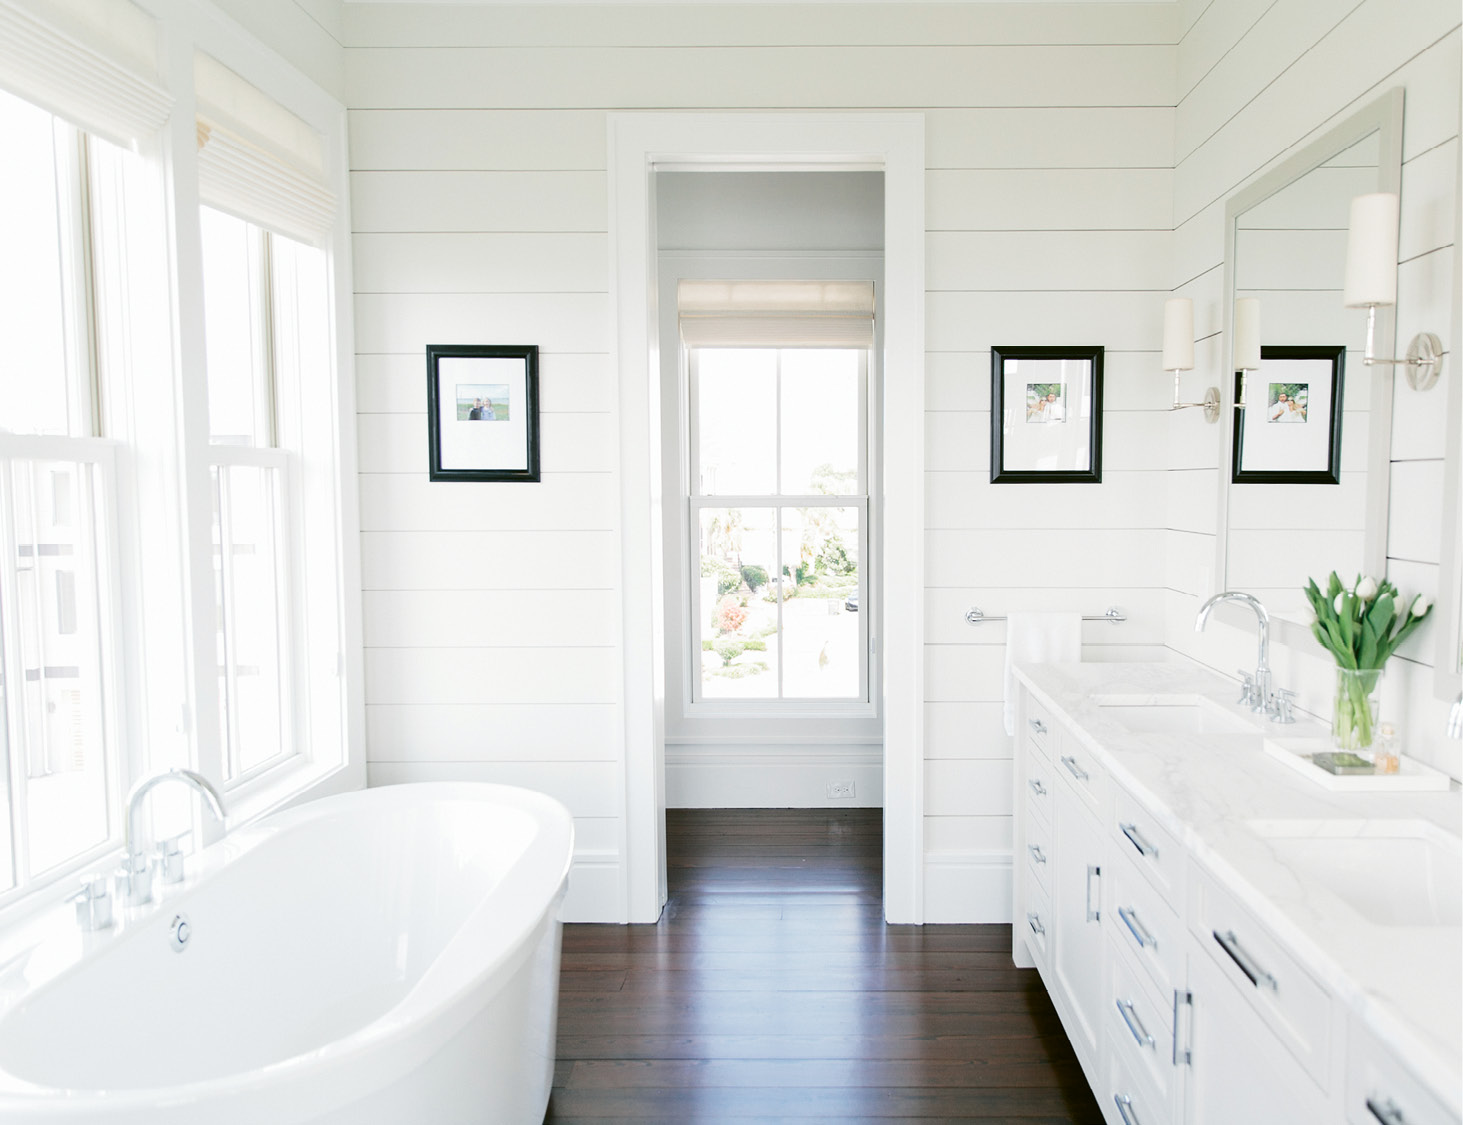 Mid-century furnishings feel clean-lined and simple, while shiplap walls in the master bath nod to coastal cottages.